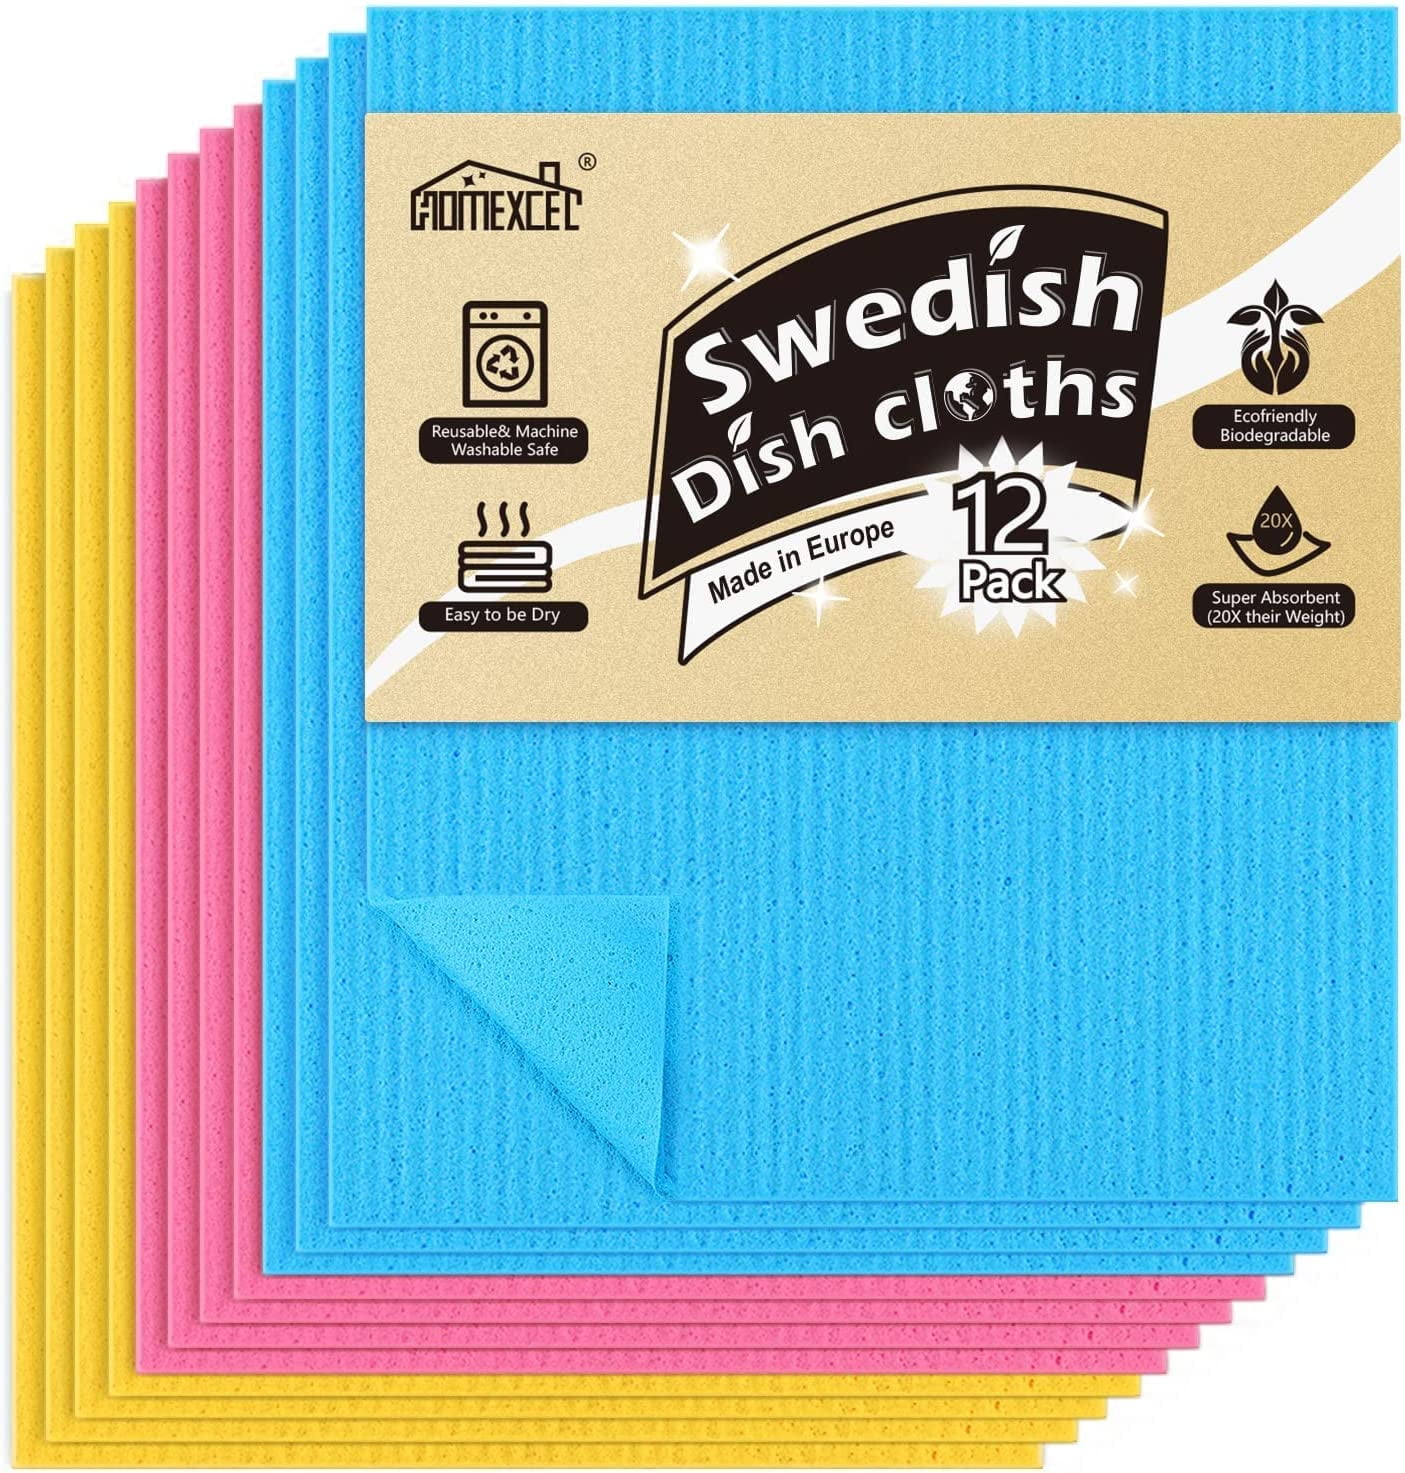 Clean It Mixed Swedish Dish Cloths - Set Of 4, Reusable, Absorbent  Cellulose Sponge Towels For Kitchen, Cleaning Counters, And Dishes  (snowflakes) : Target